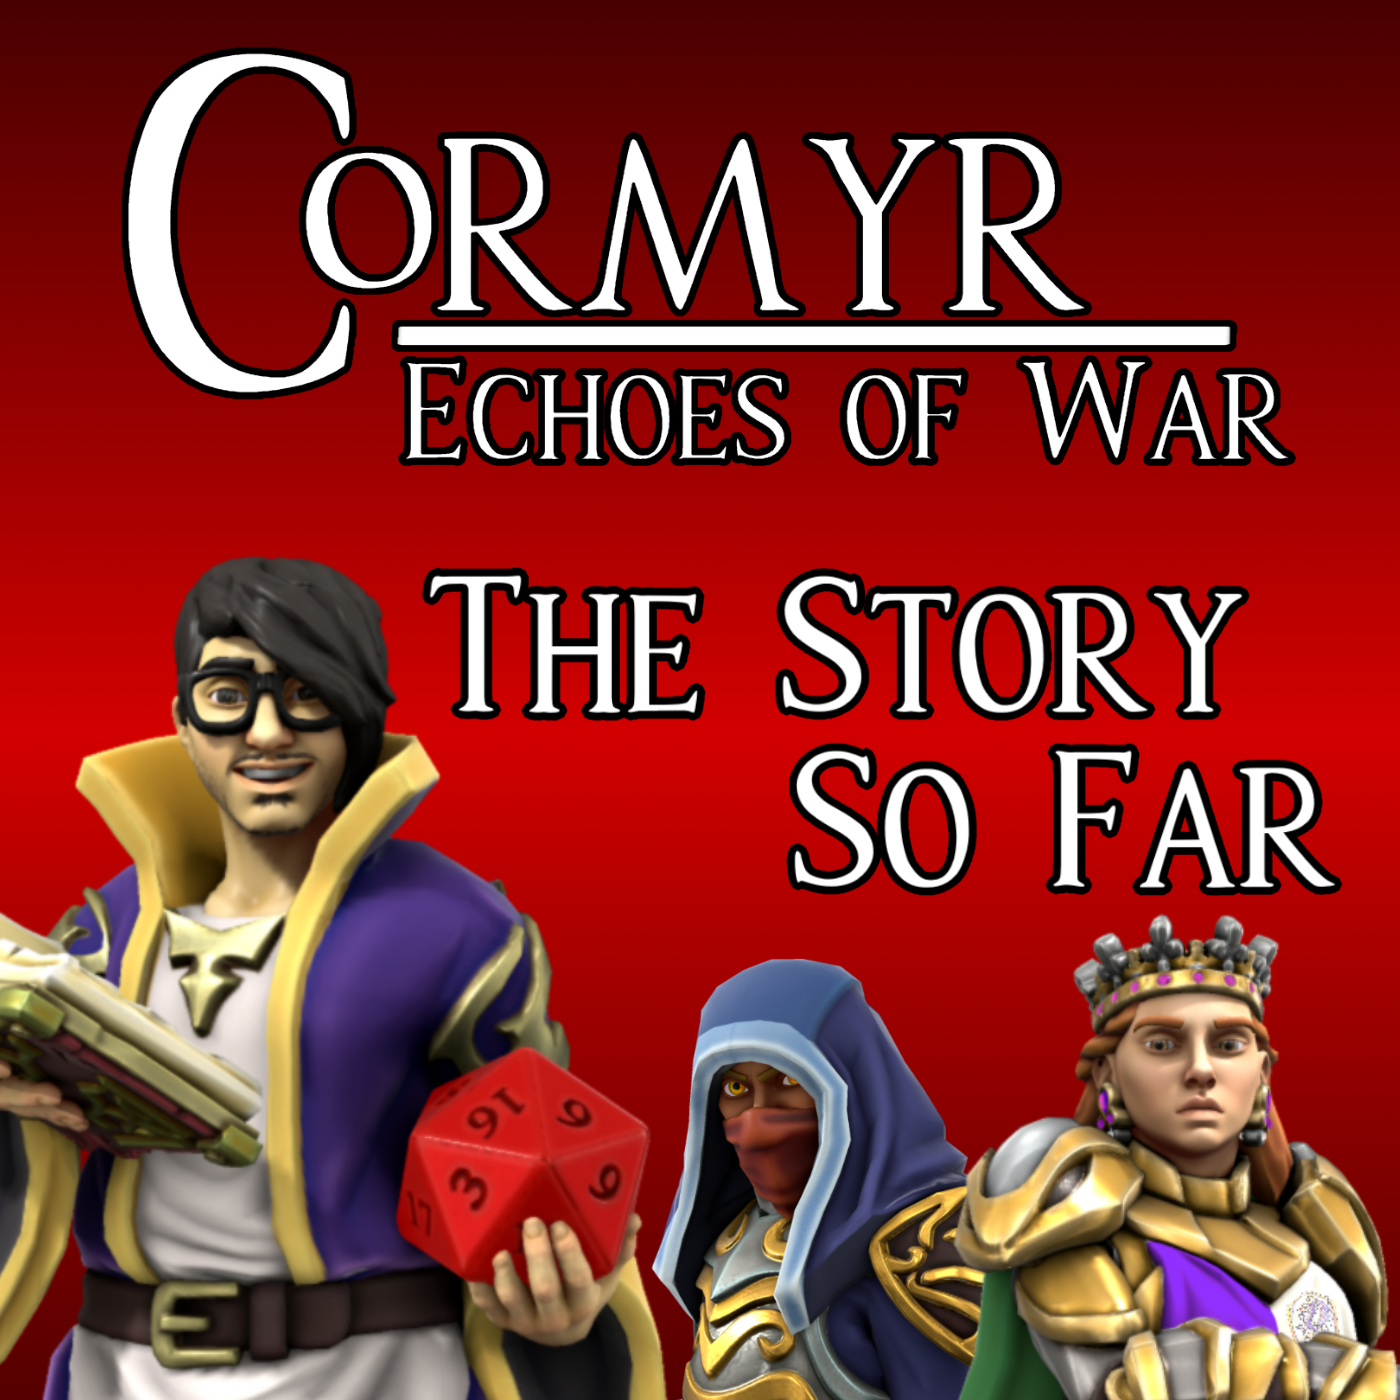 Cormyr: Echoes of War - The Story So Far